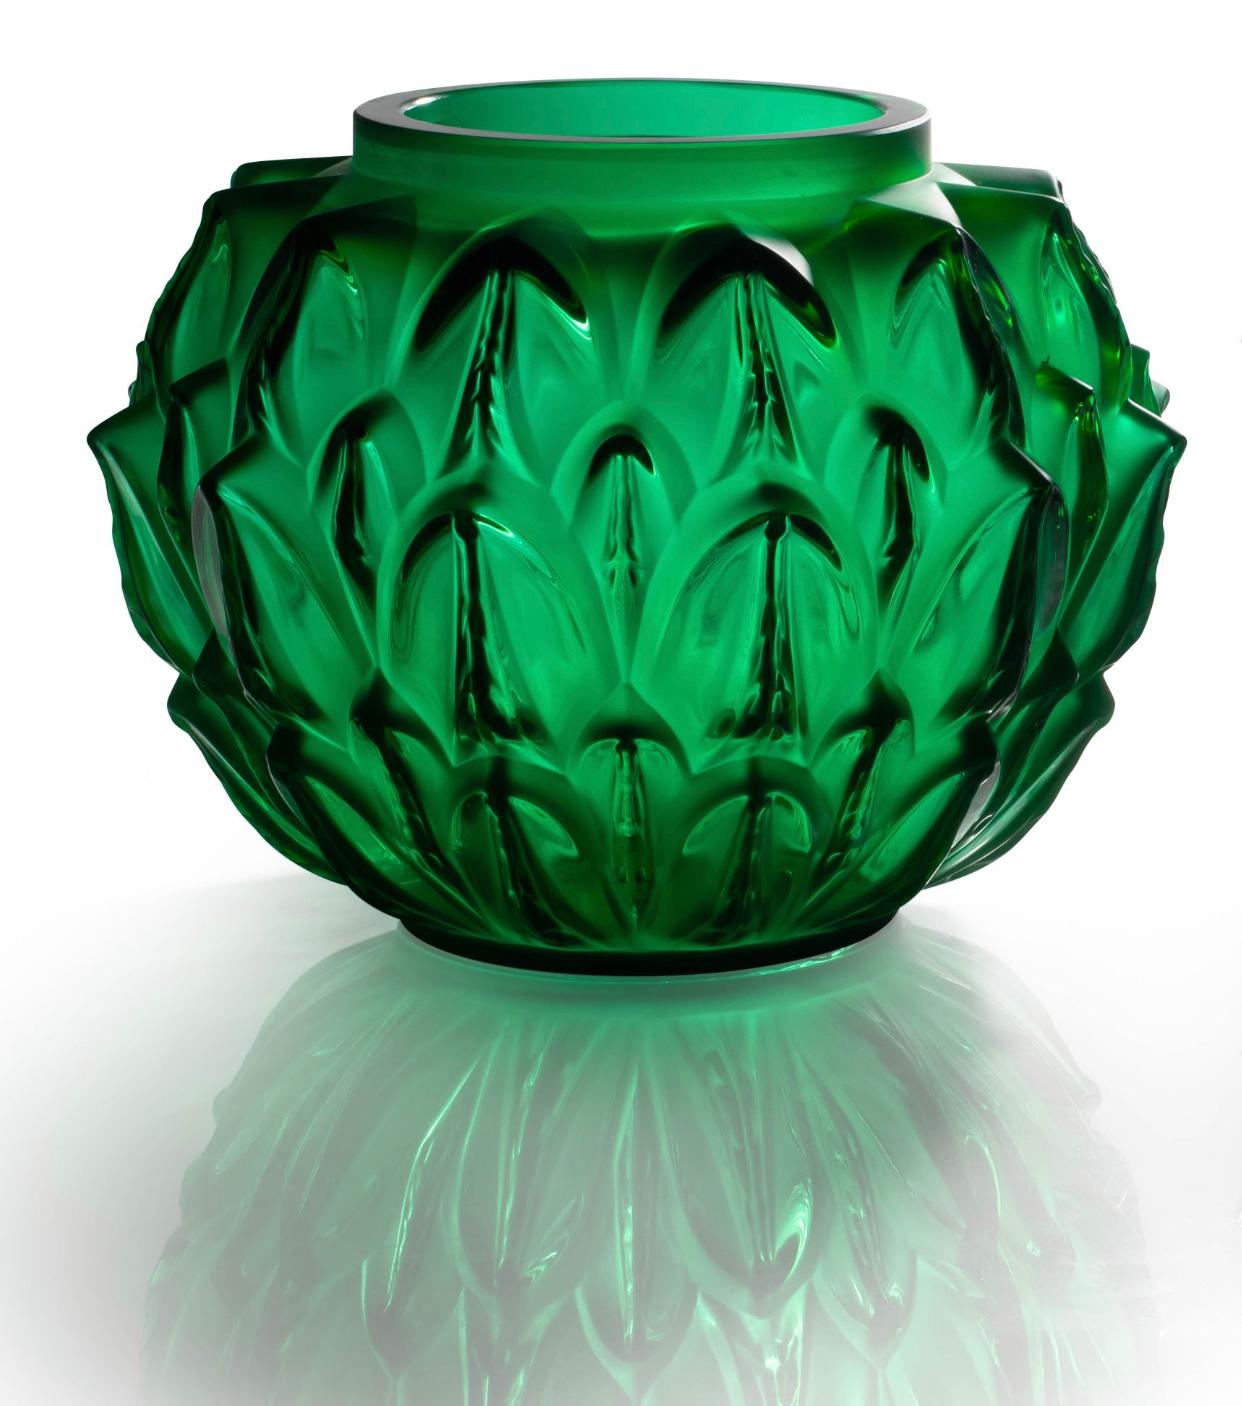 Molded Lalique France Cynara Vase in Emerald Green Crystal as New in Box, Leaves